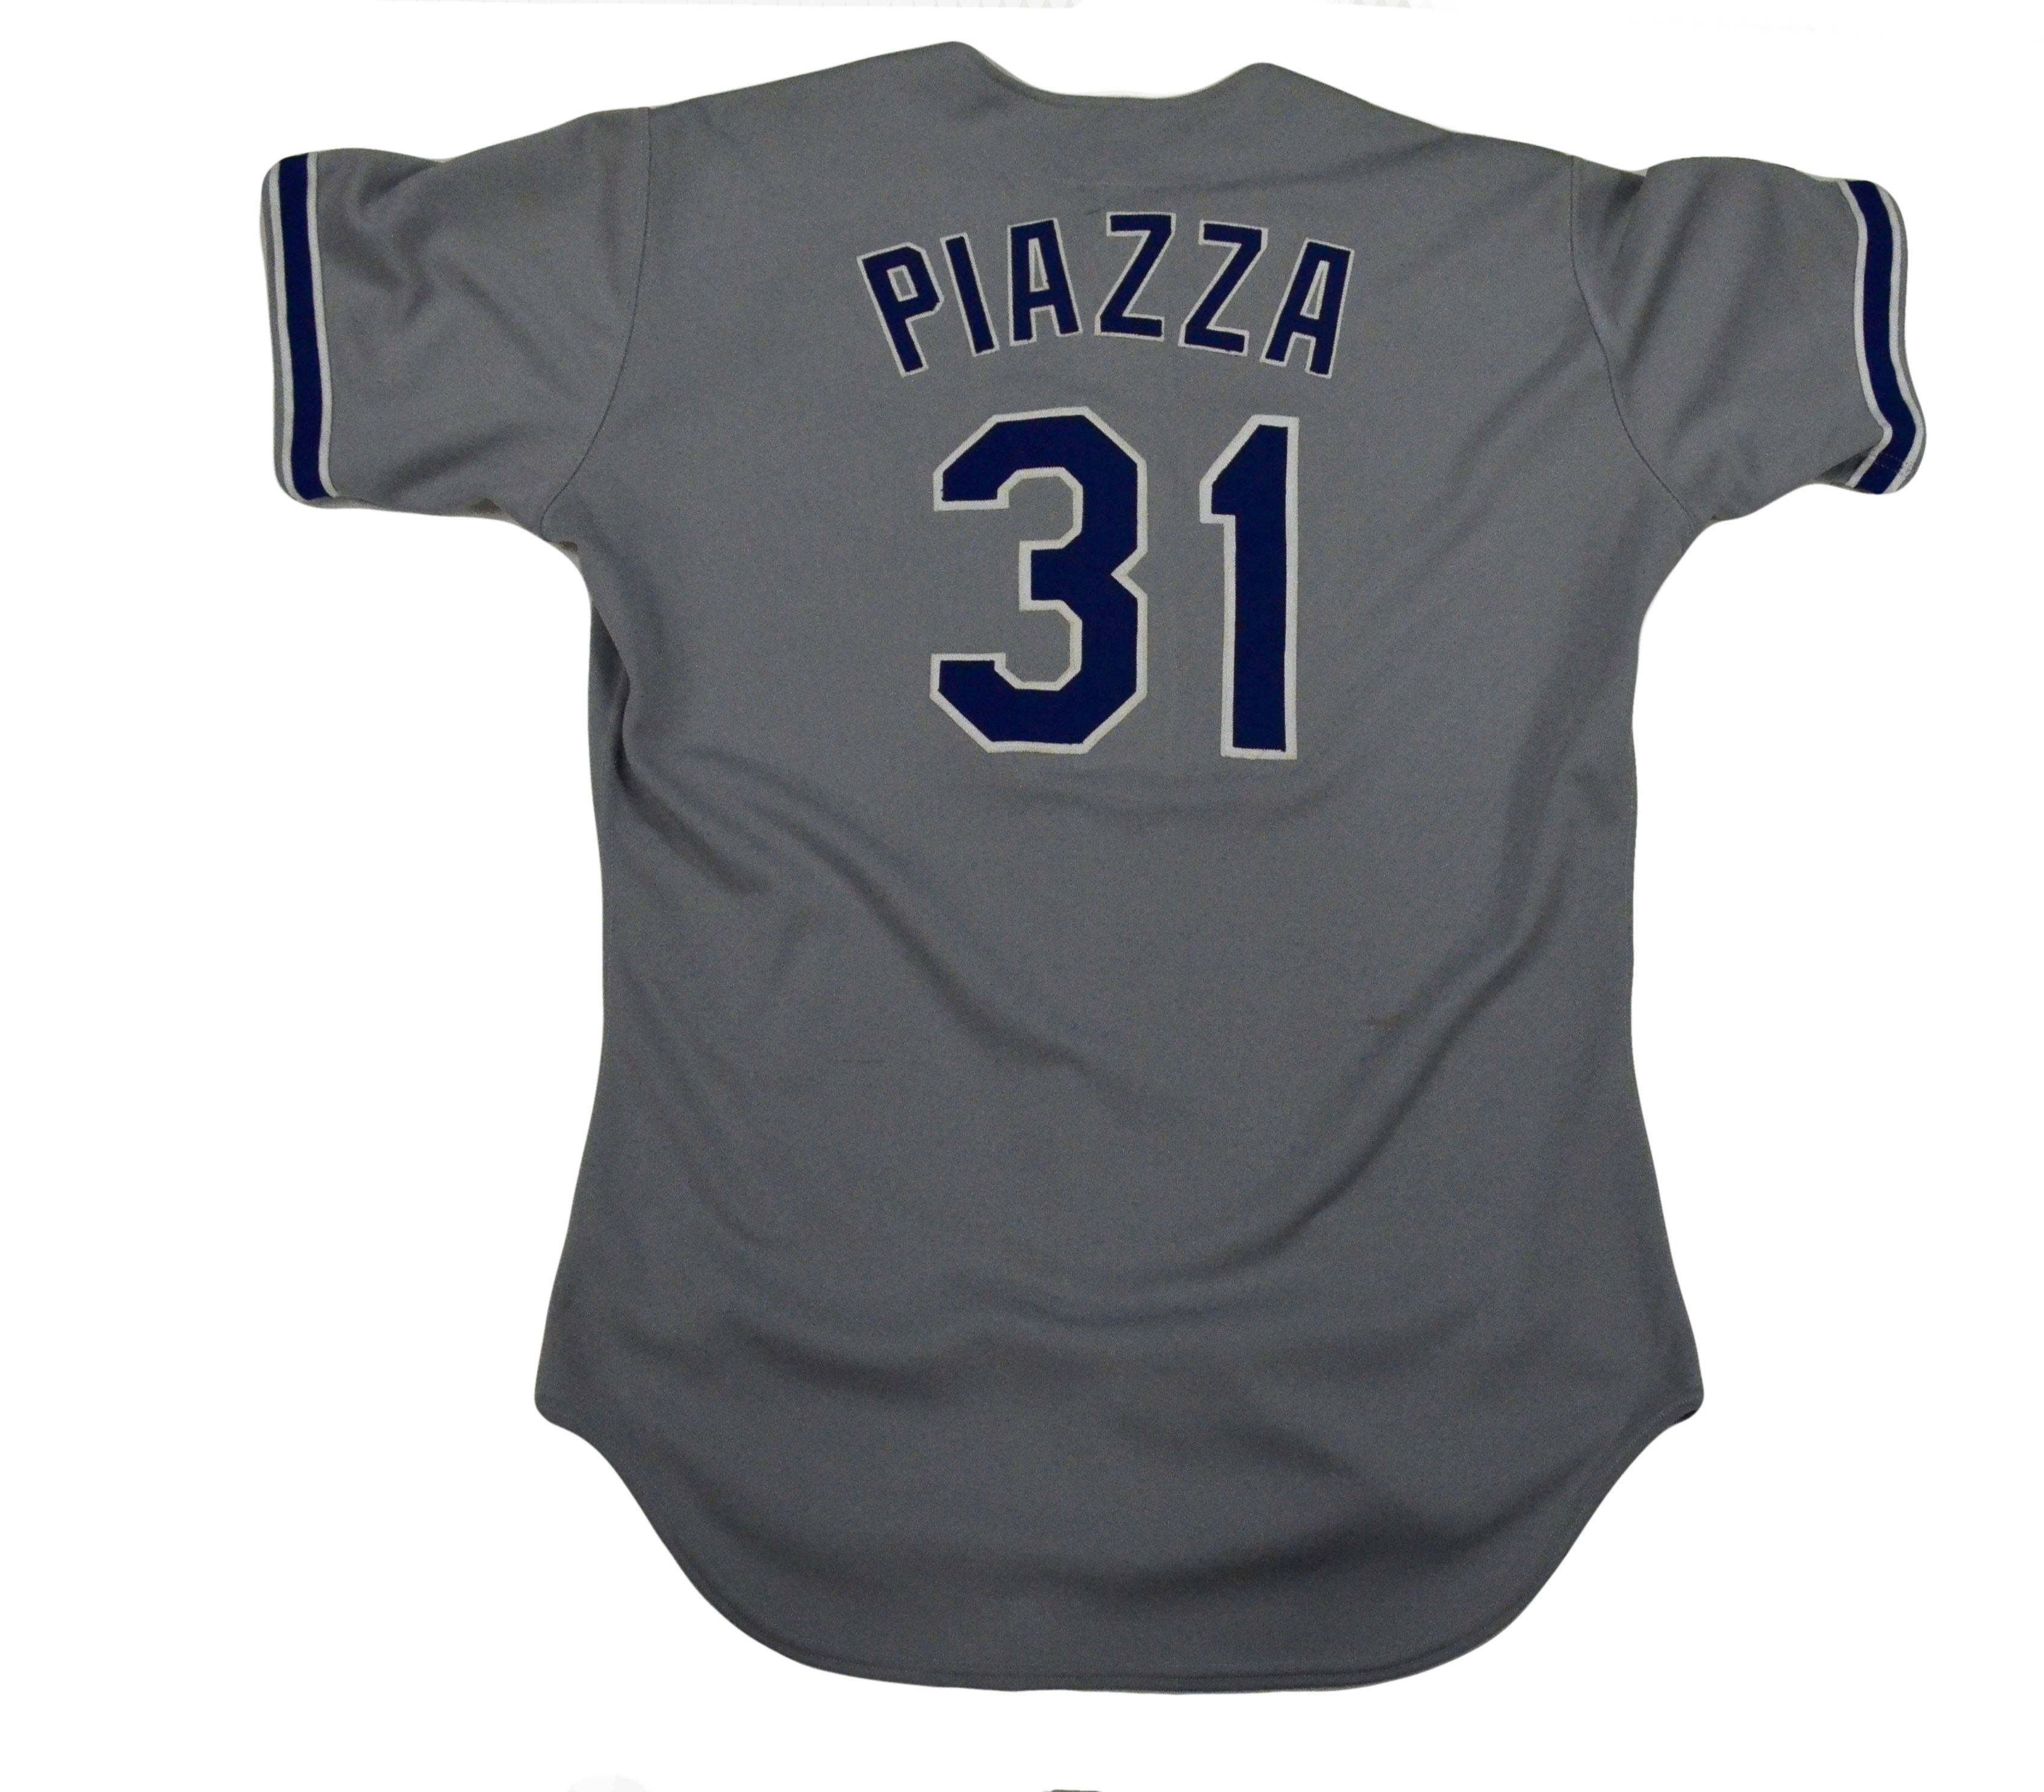 mike piazza jersey